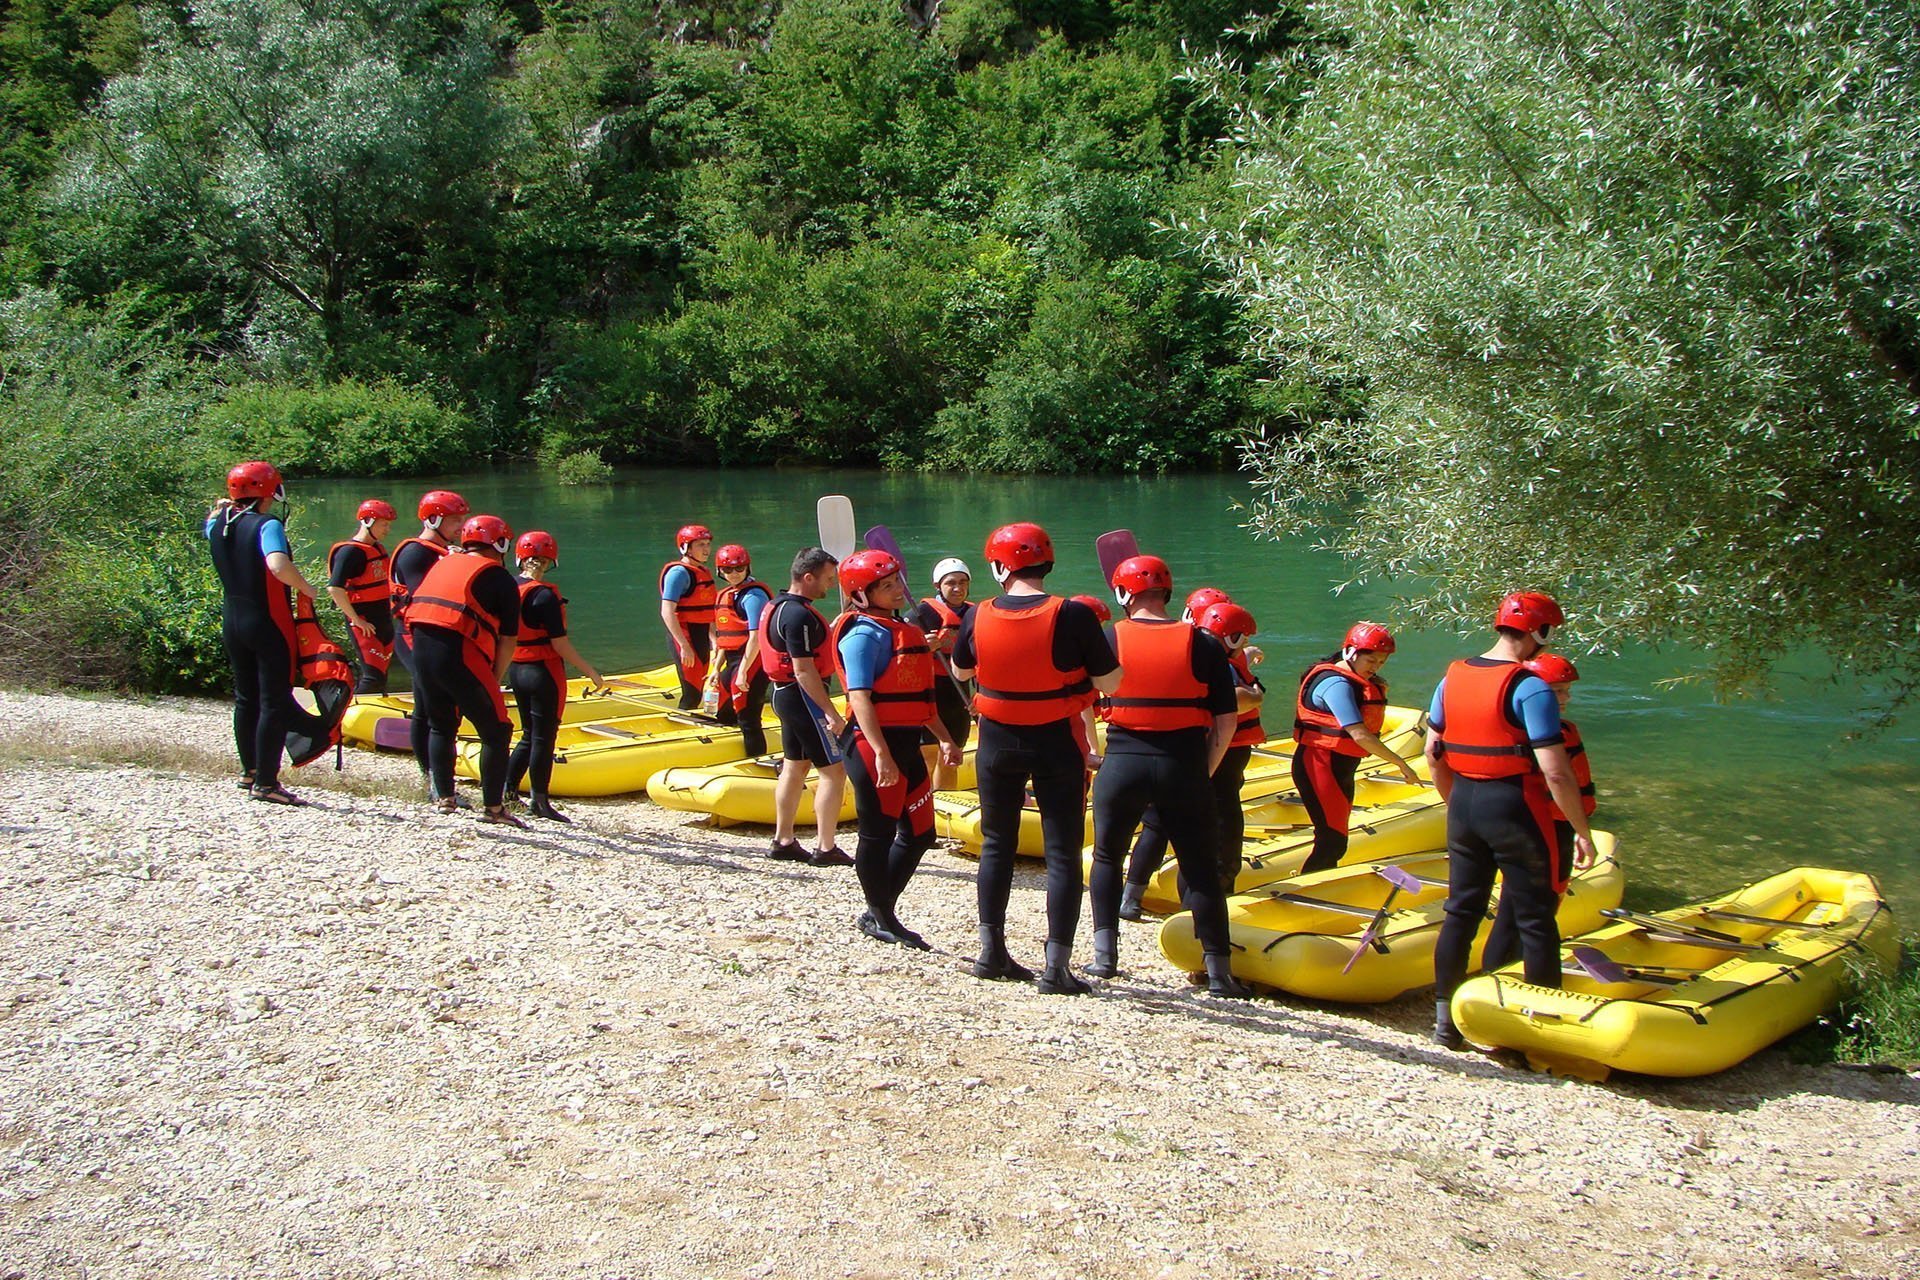 Our rafting excursion starts from a hidden river beach